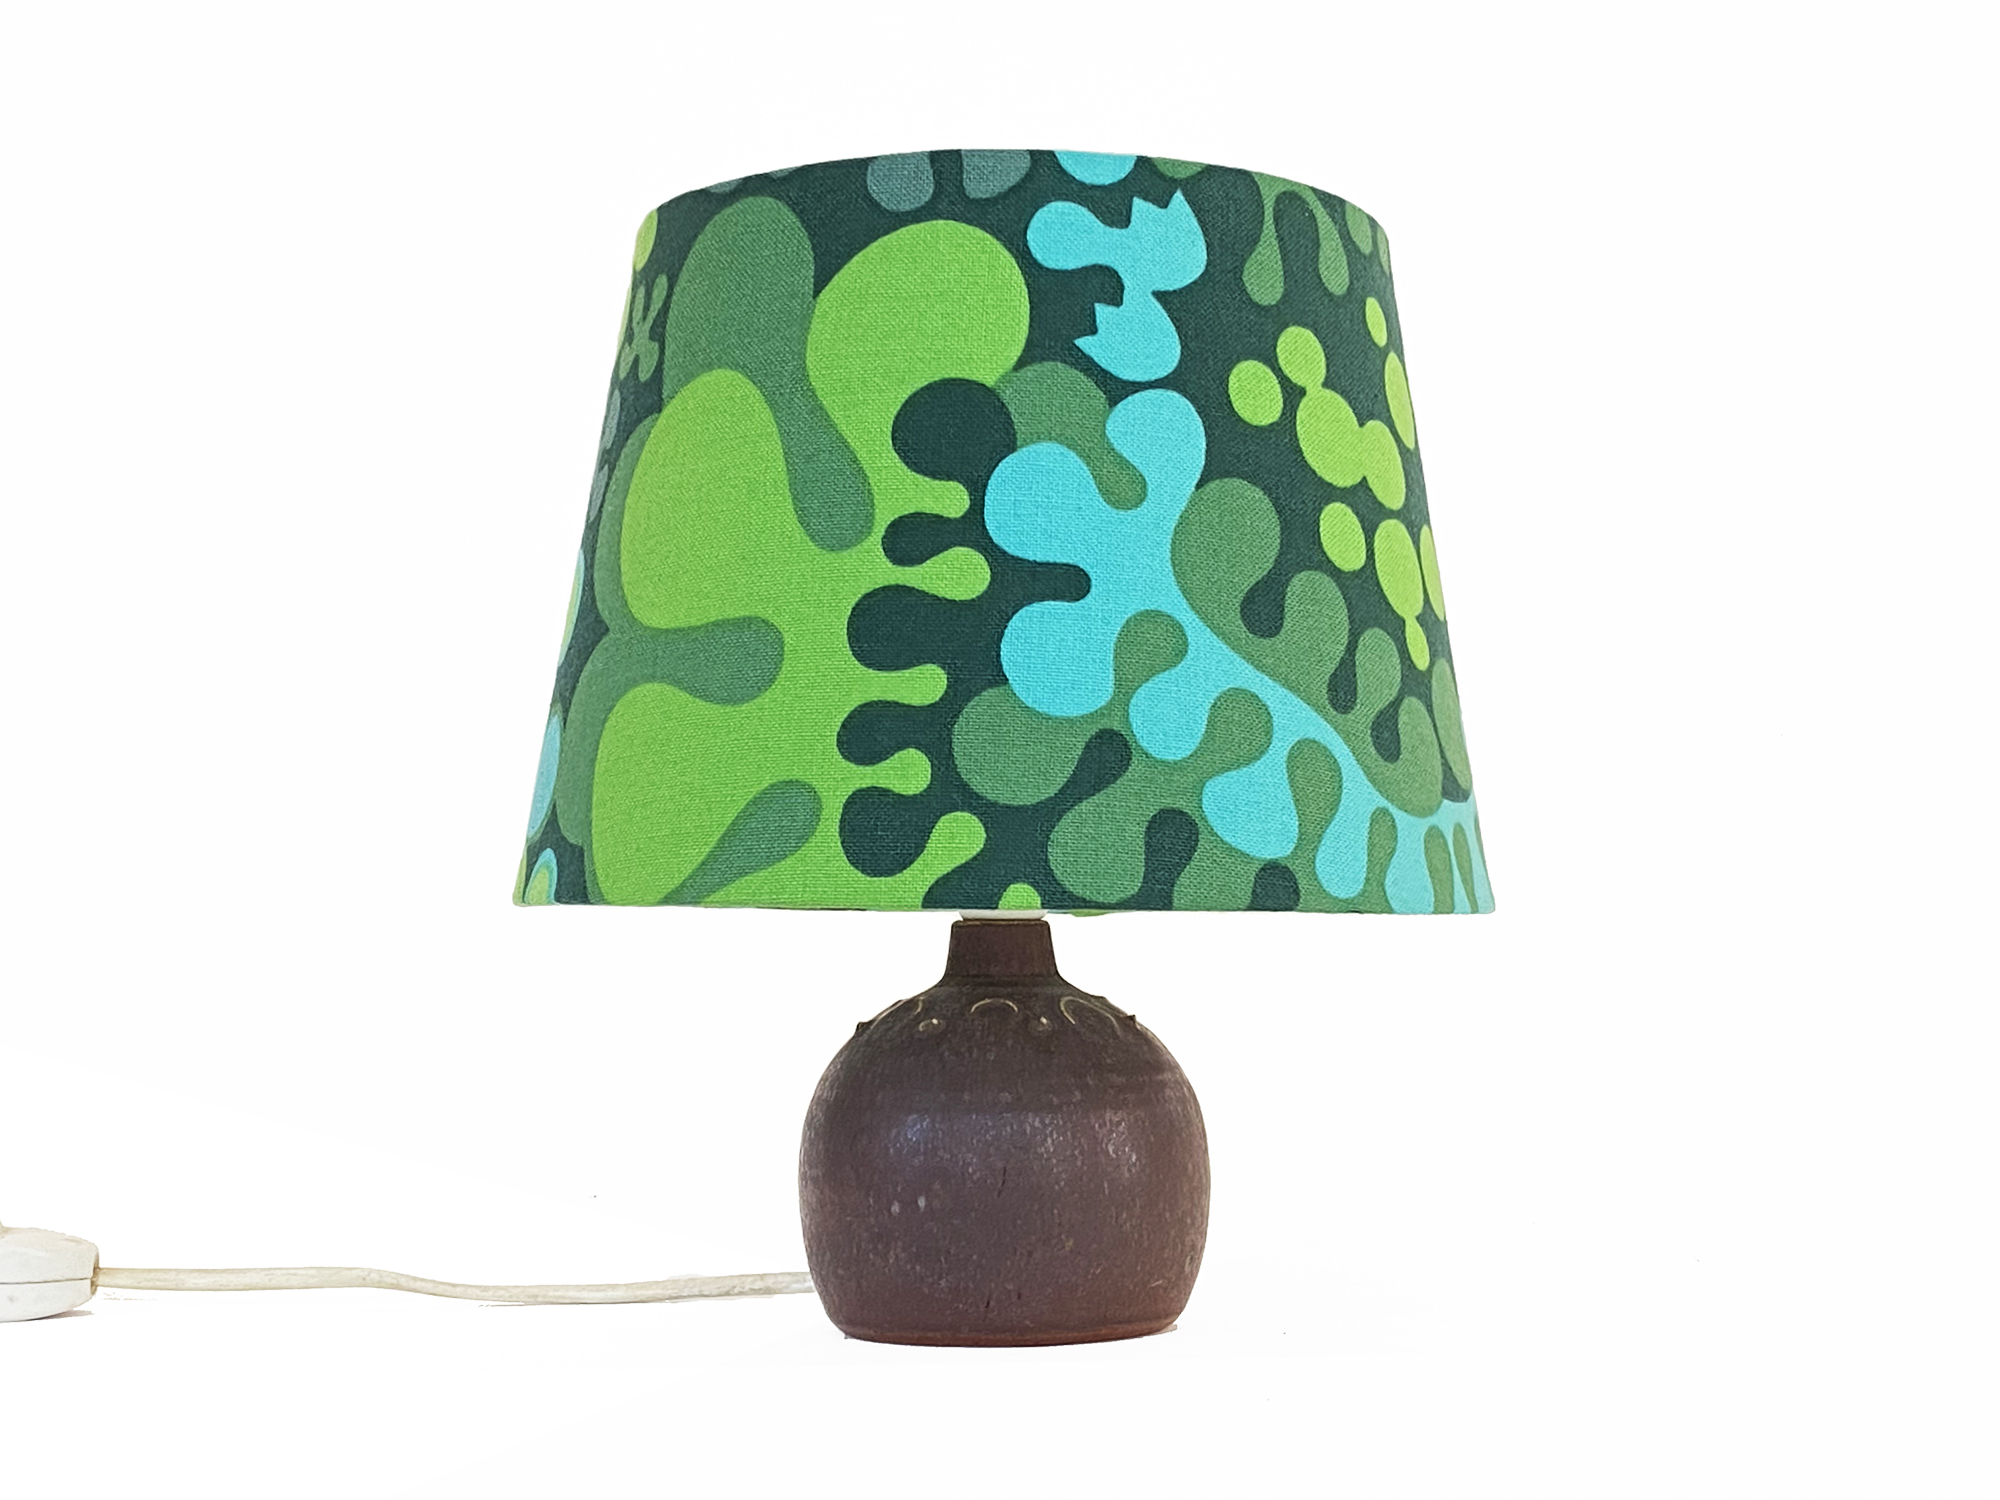 Small stoneware table light by Rolf Palm. Shade with repurposed vintage fabric by Göta Trägårdh. Sweden 1960s.